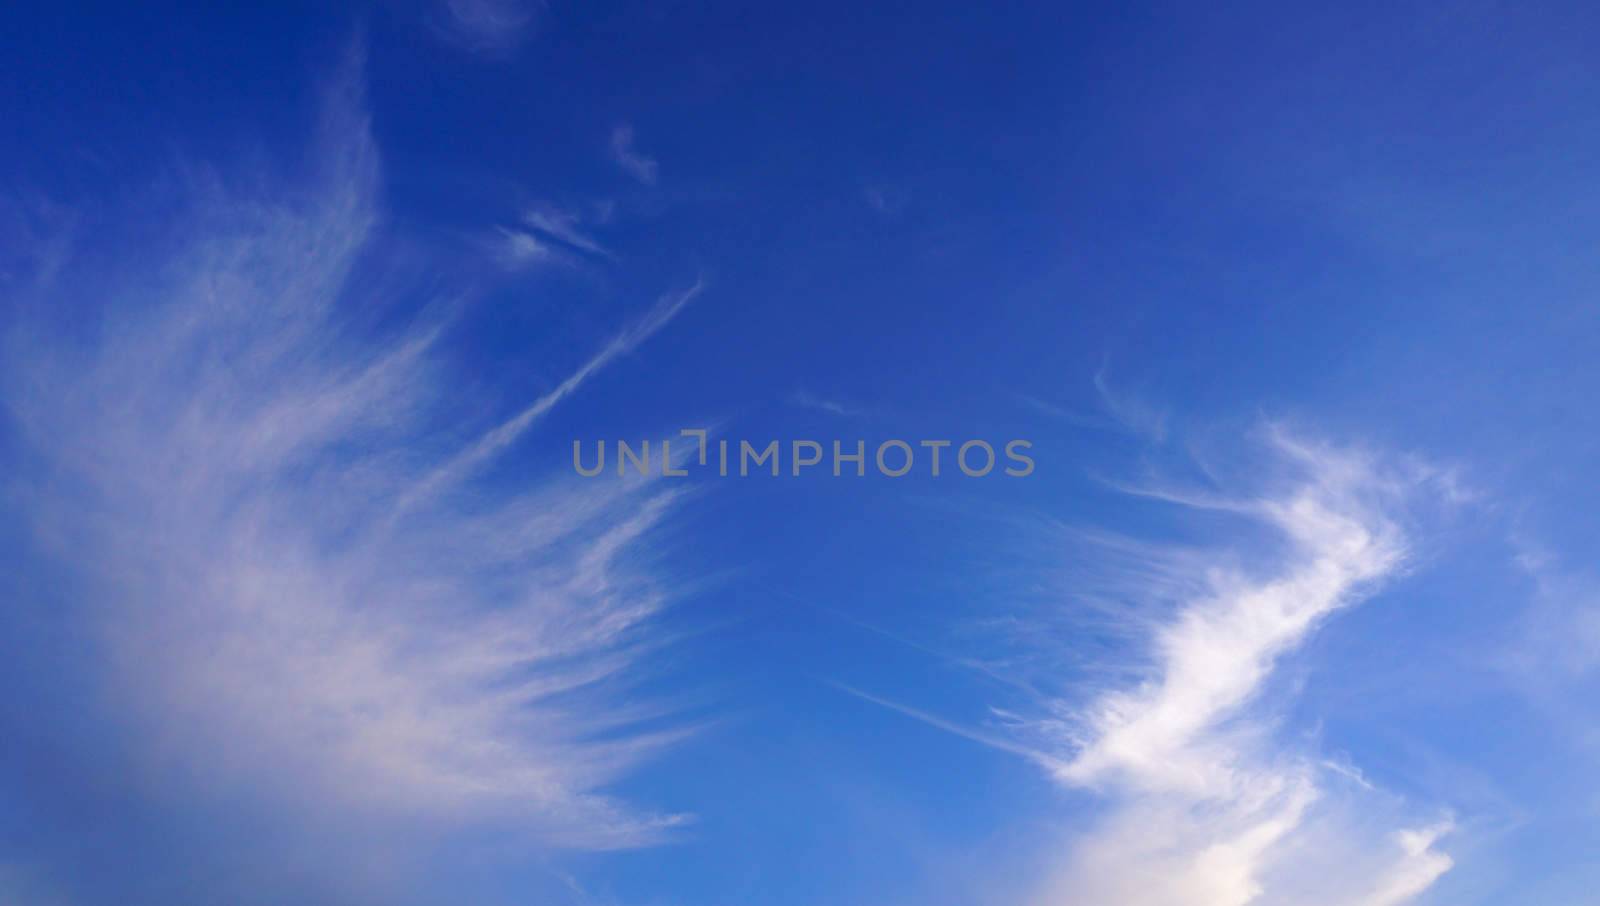 Blue sky baackground and clouds by polarbearstudio